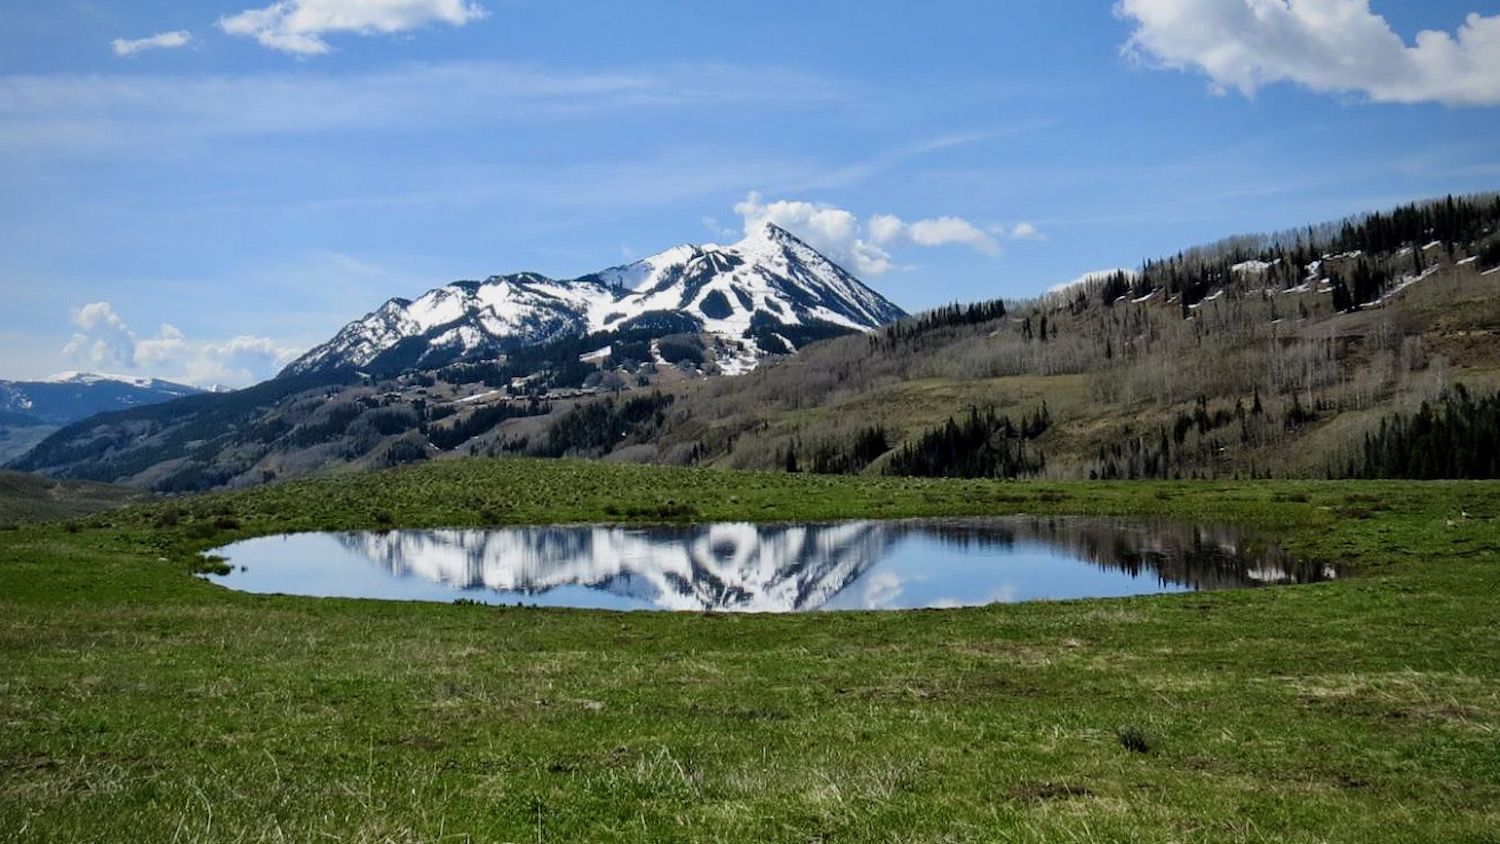 A photo of an alpine pond with a mountain in its reflection by Susan Washko